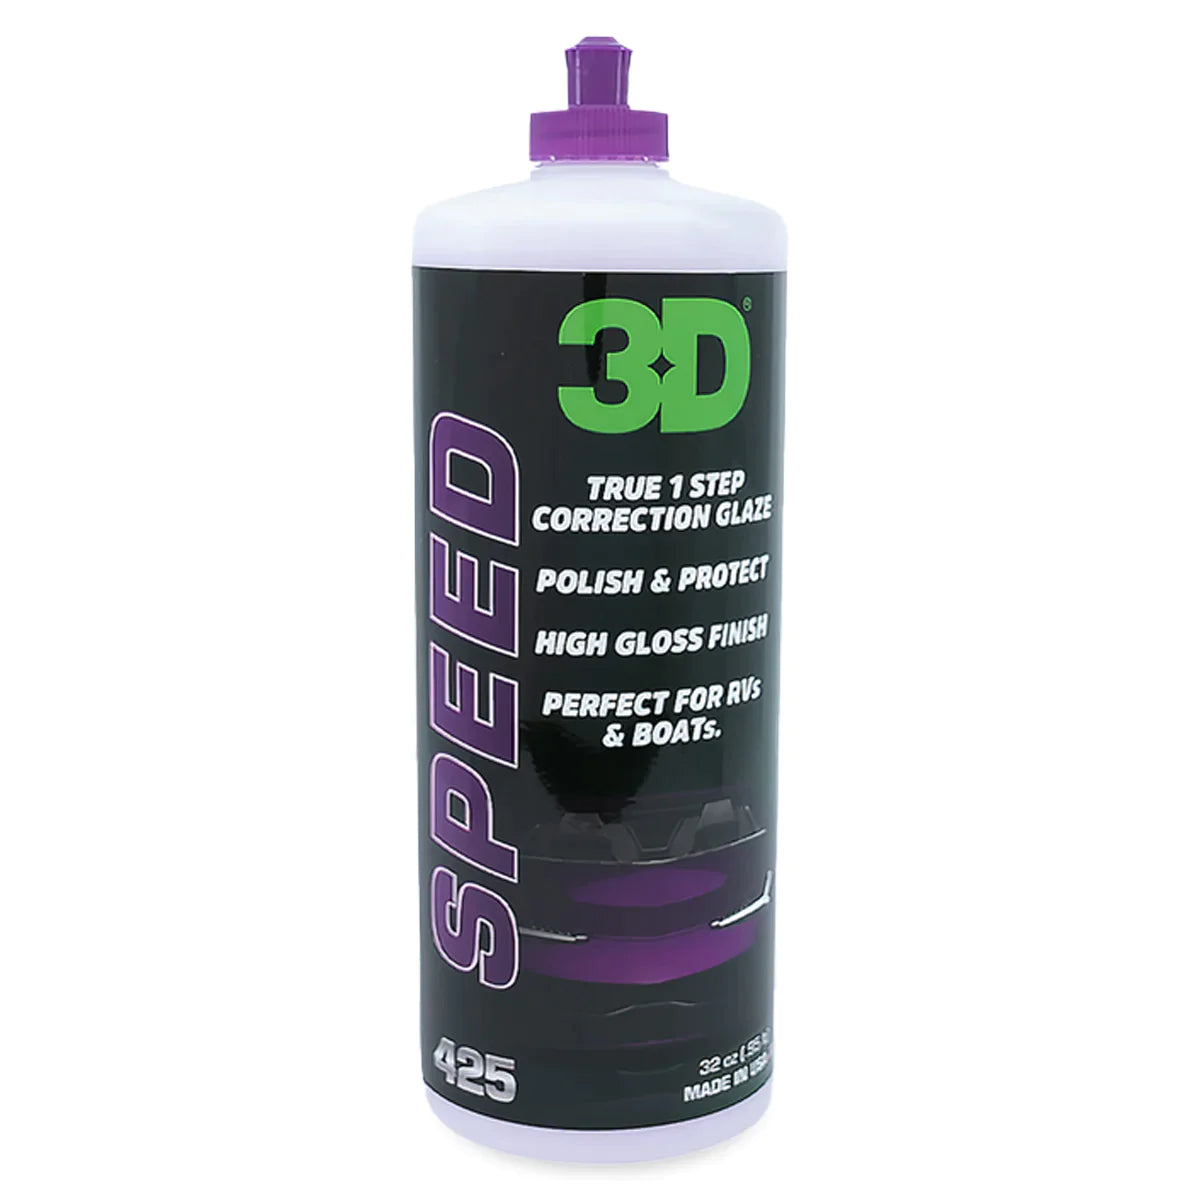 3D Speed All-In-One Compound